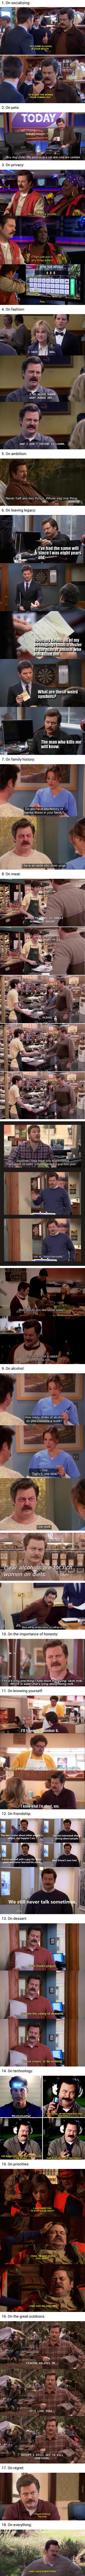 18 times ron swanson proved that he has the wisdom of the ages